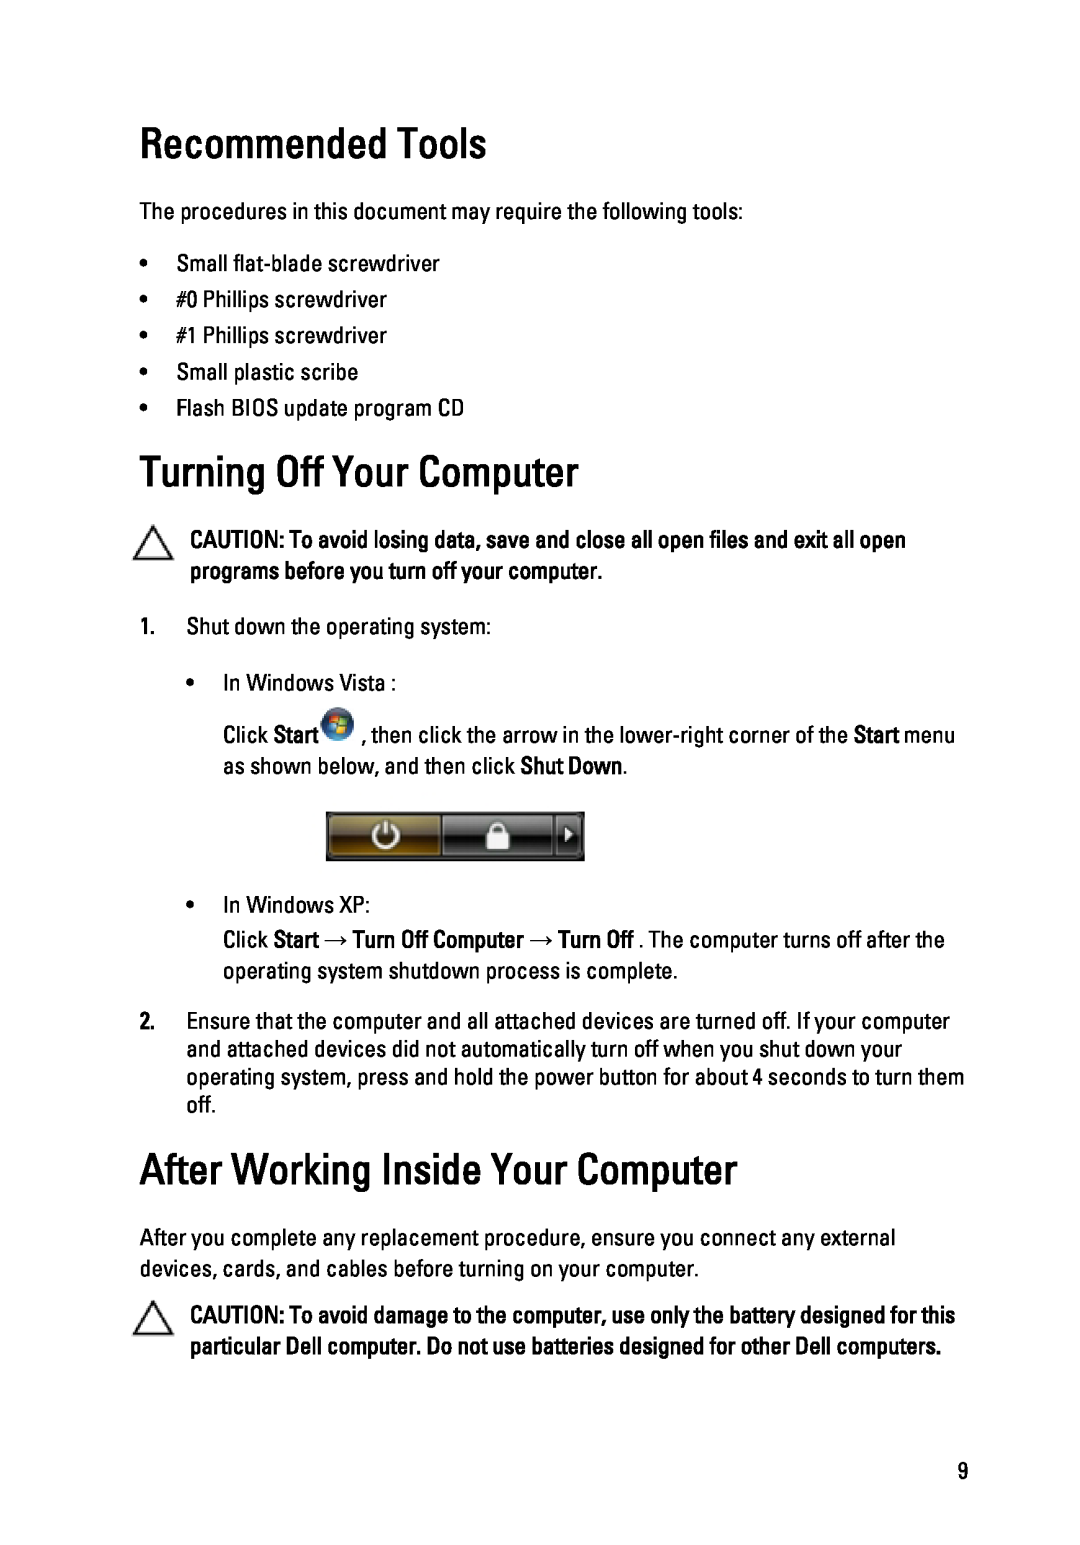 Dell 3450 owner manual Recommended Tools, Turning Off Your Computer, After Working Inside Your Computer 